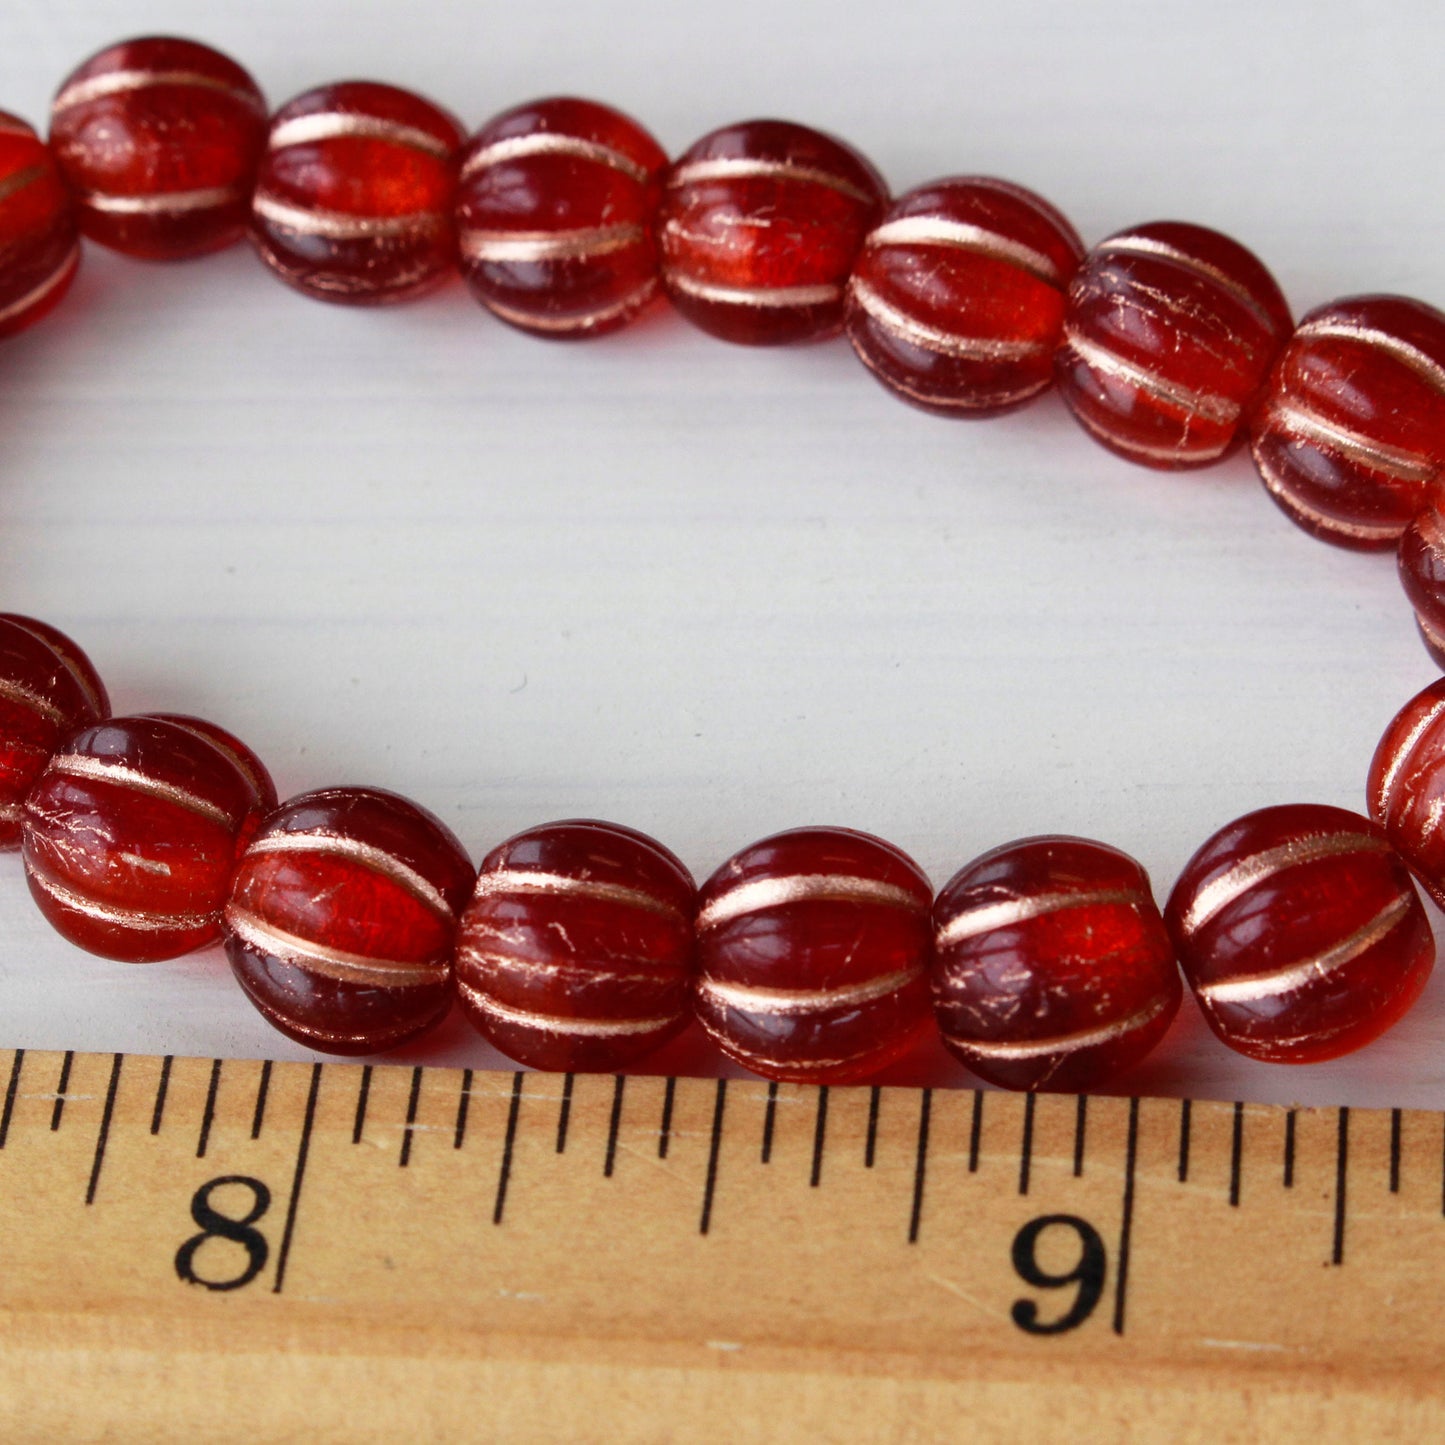 8mm Melon Beads - Red With Gold Wash - 20 Beads